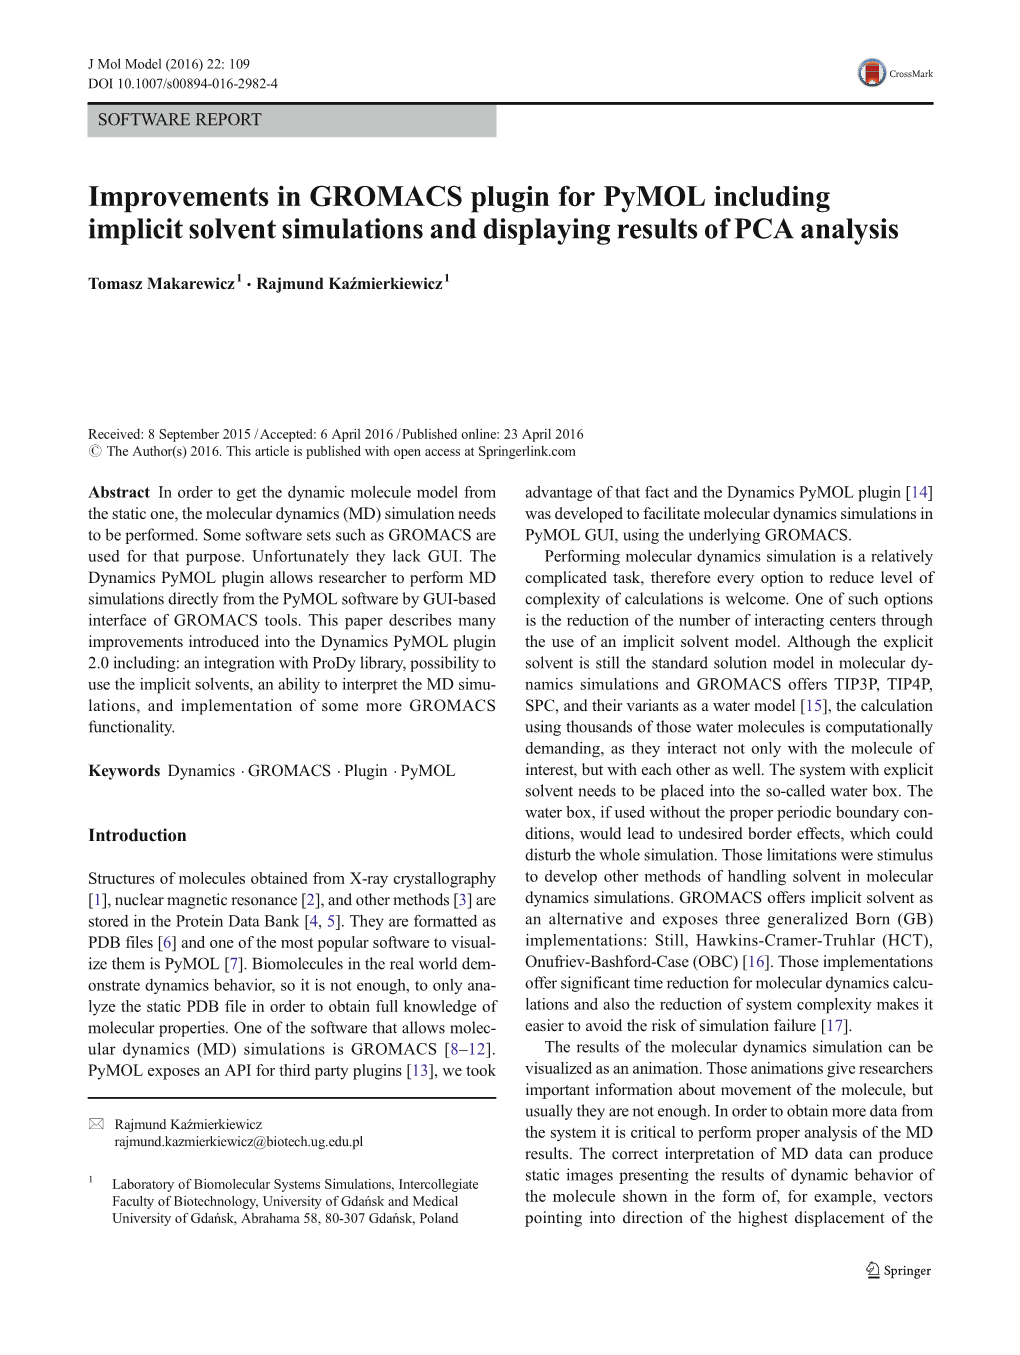 Improvements in GROMACS Plugin for Pymol Including Implicit Solvent Simulations and Displaying Results of PCA Analysis